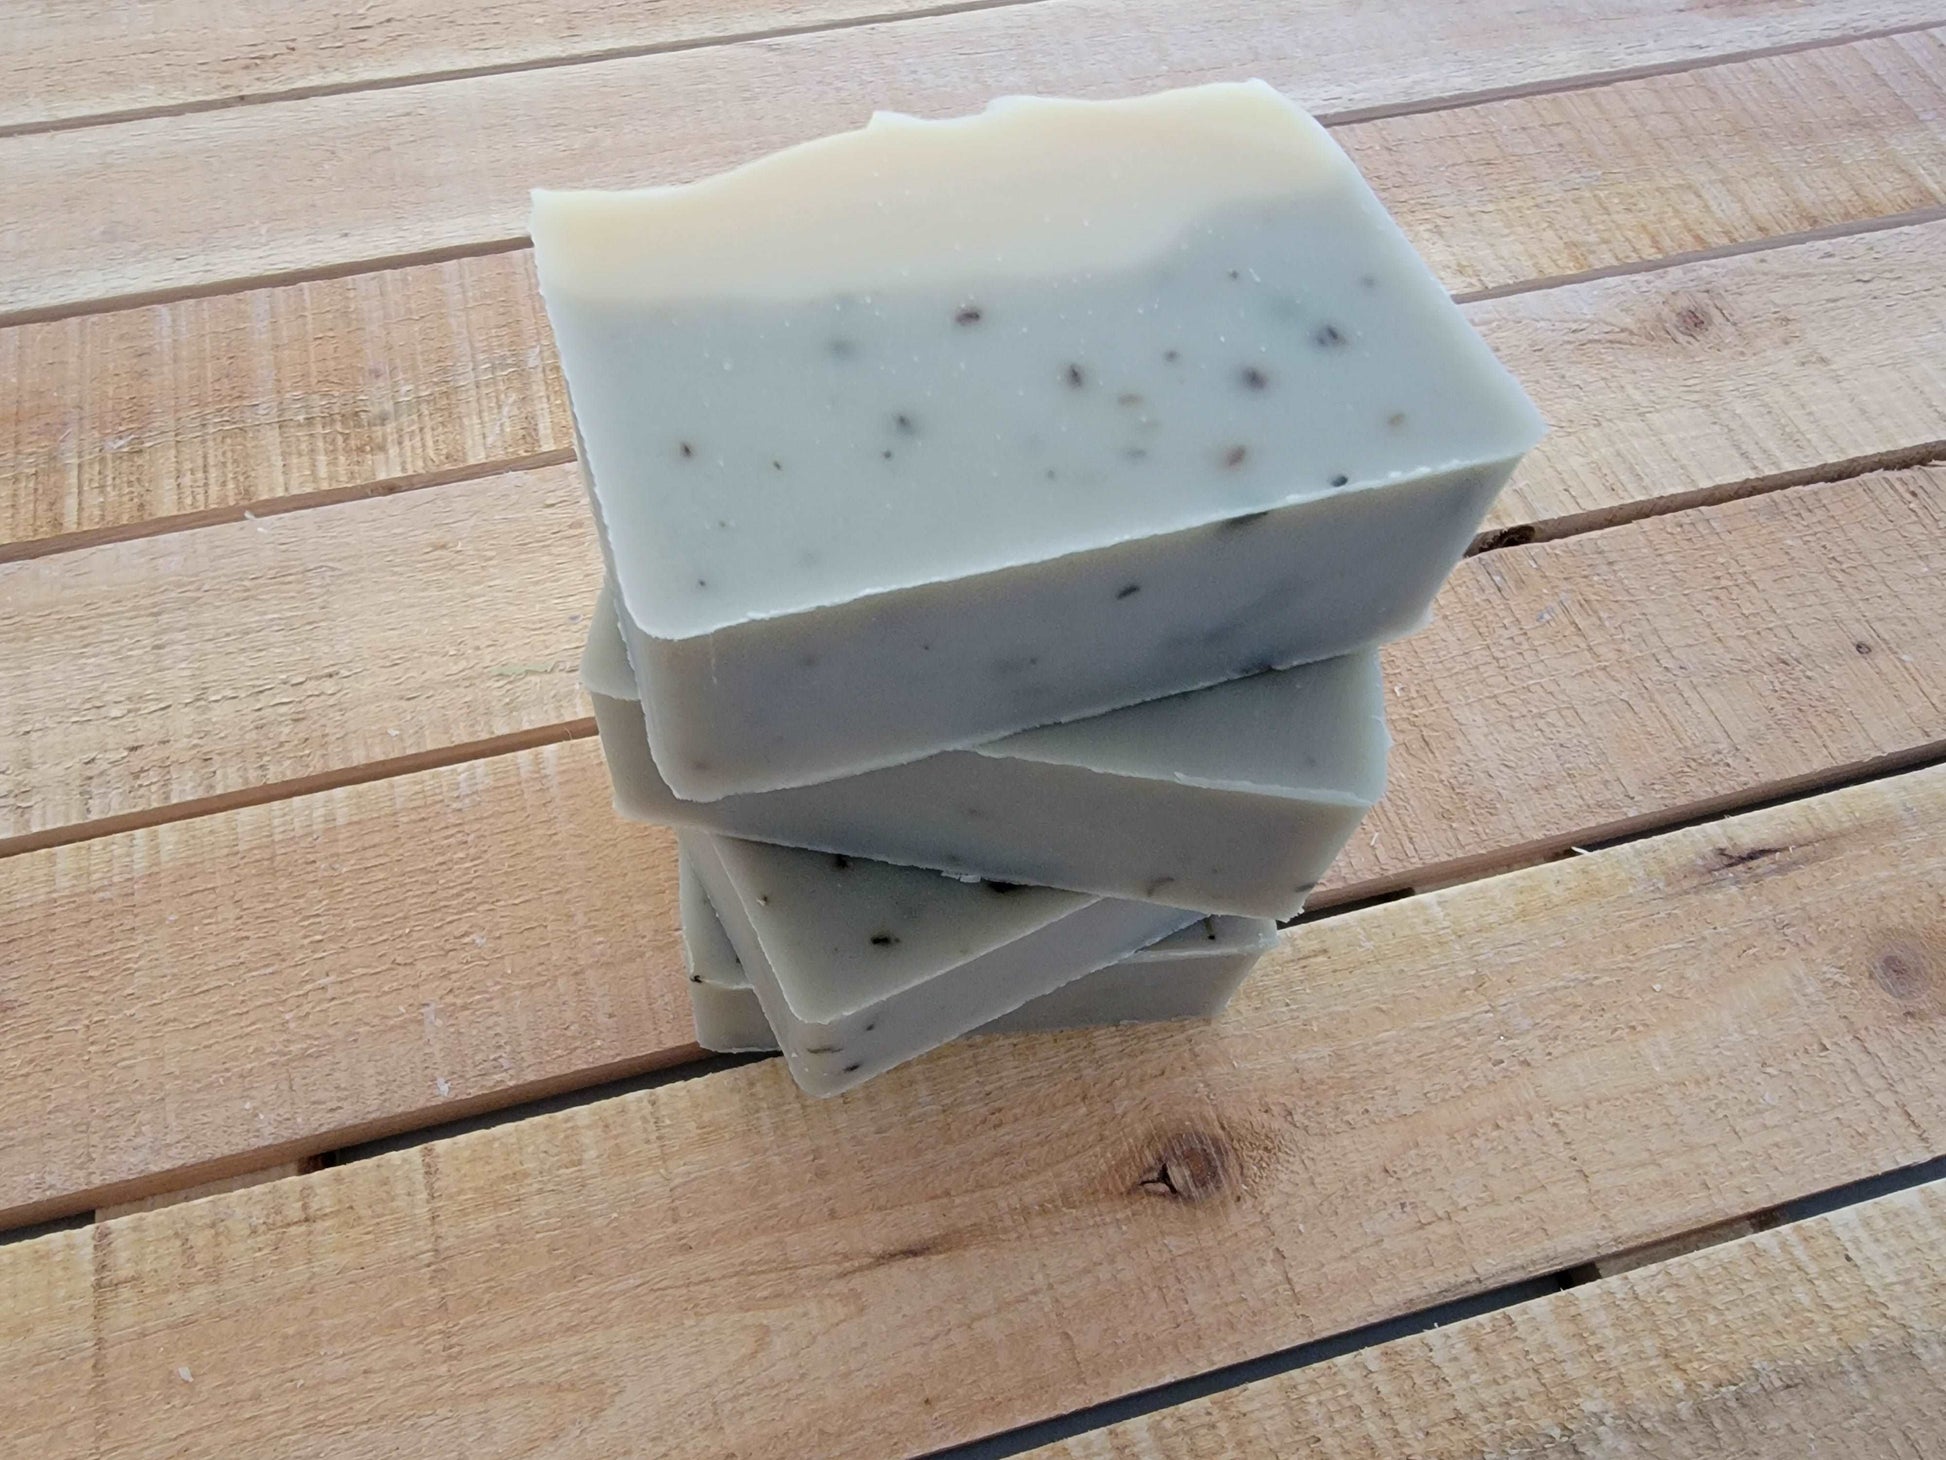 Peppermint and Eucalyptus Soap | Handmade and Natural | Sunflower Soaps